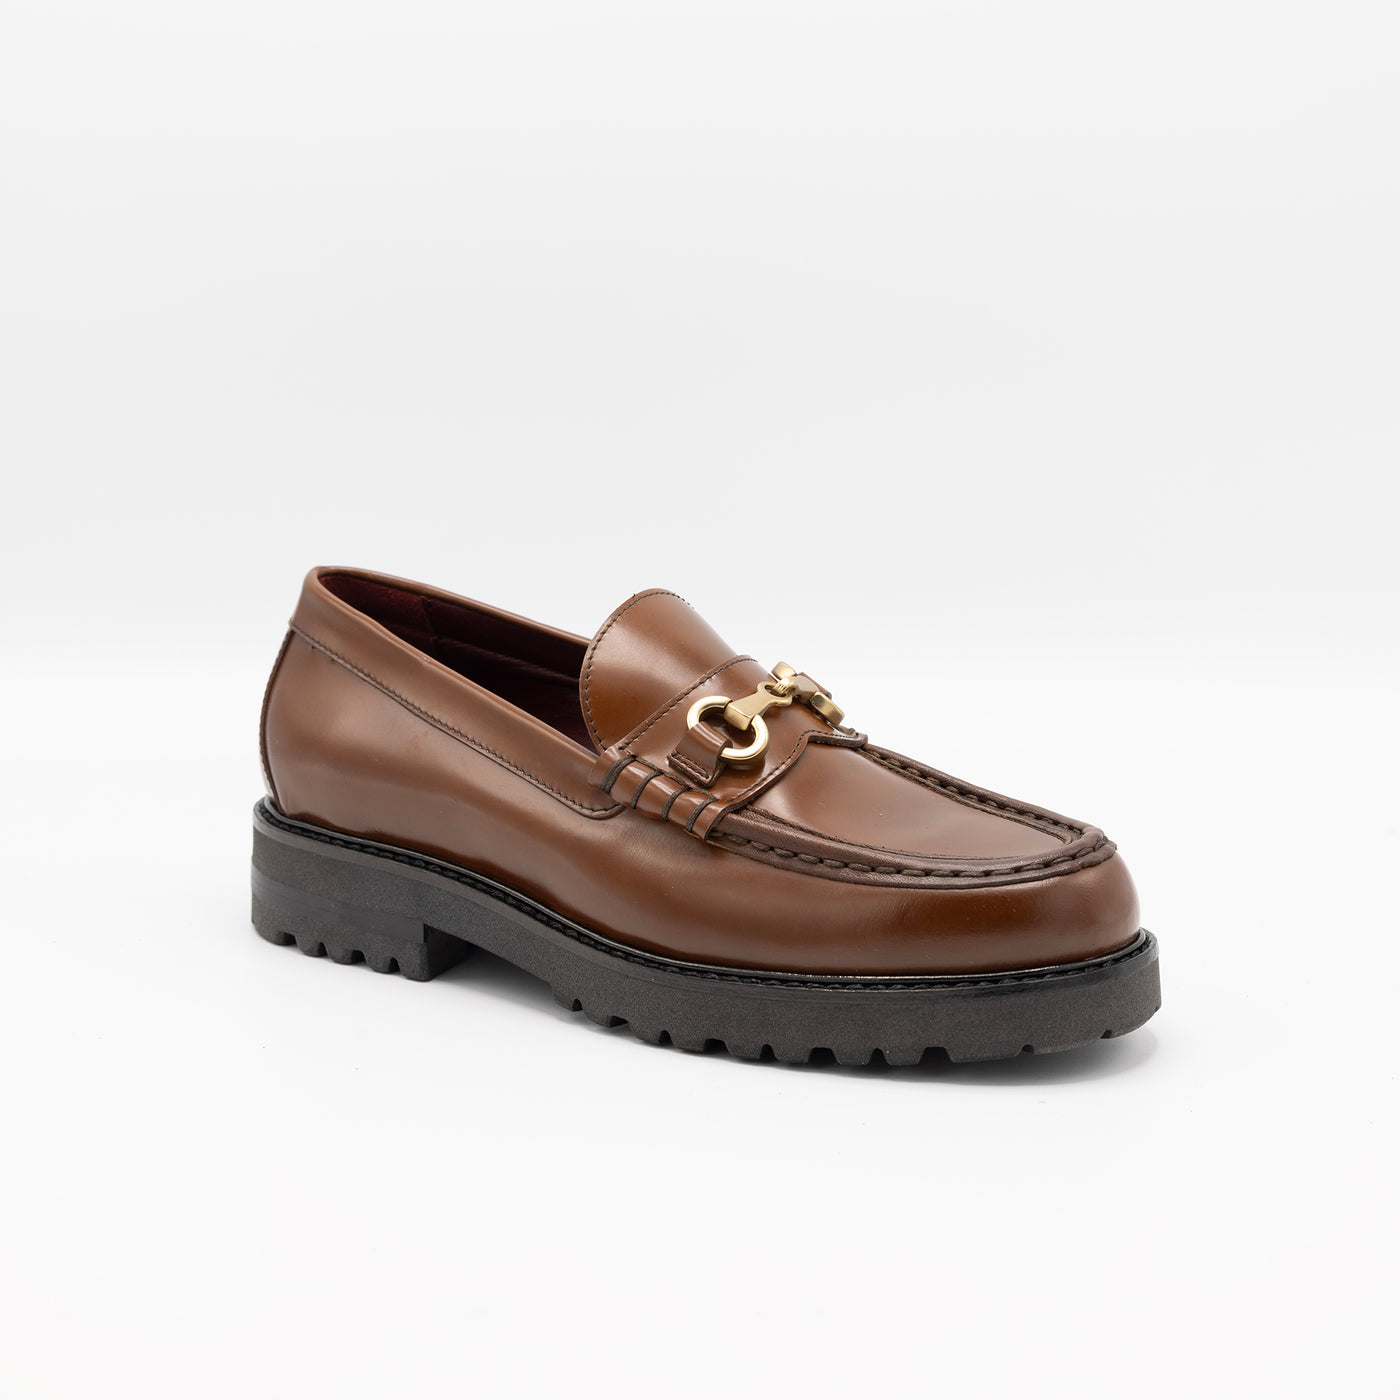 Patent cognac leather loafers with horsebit. 